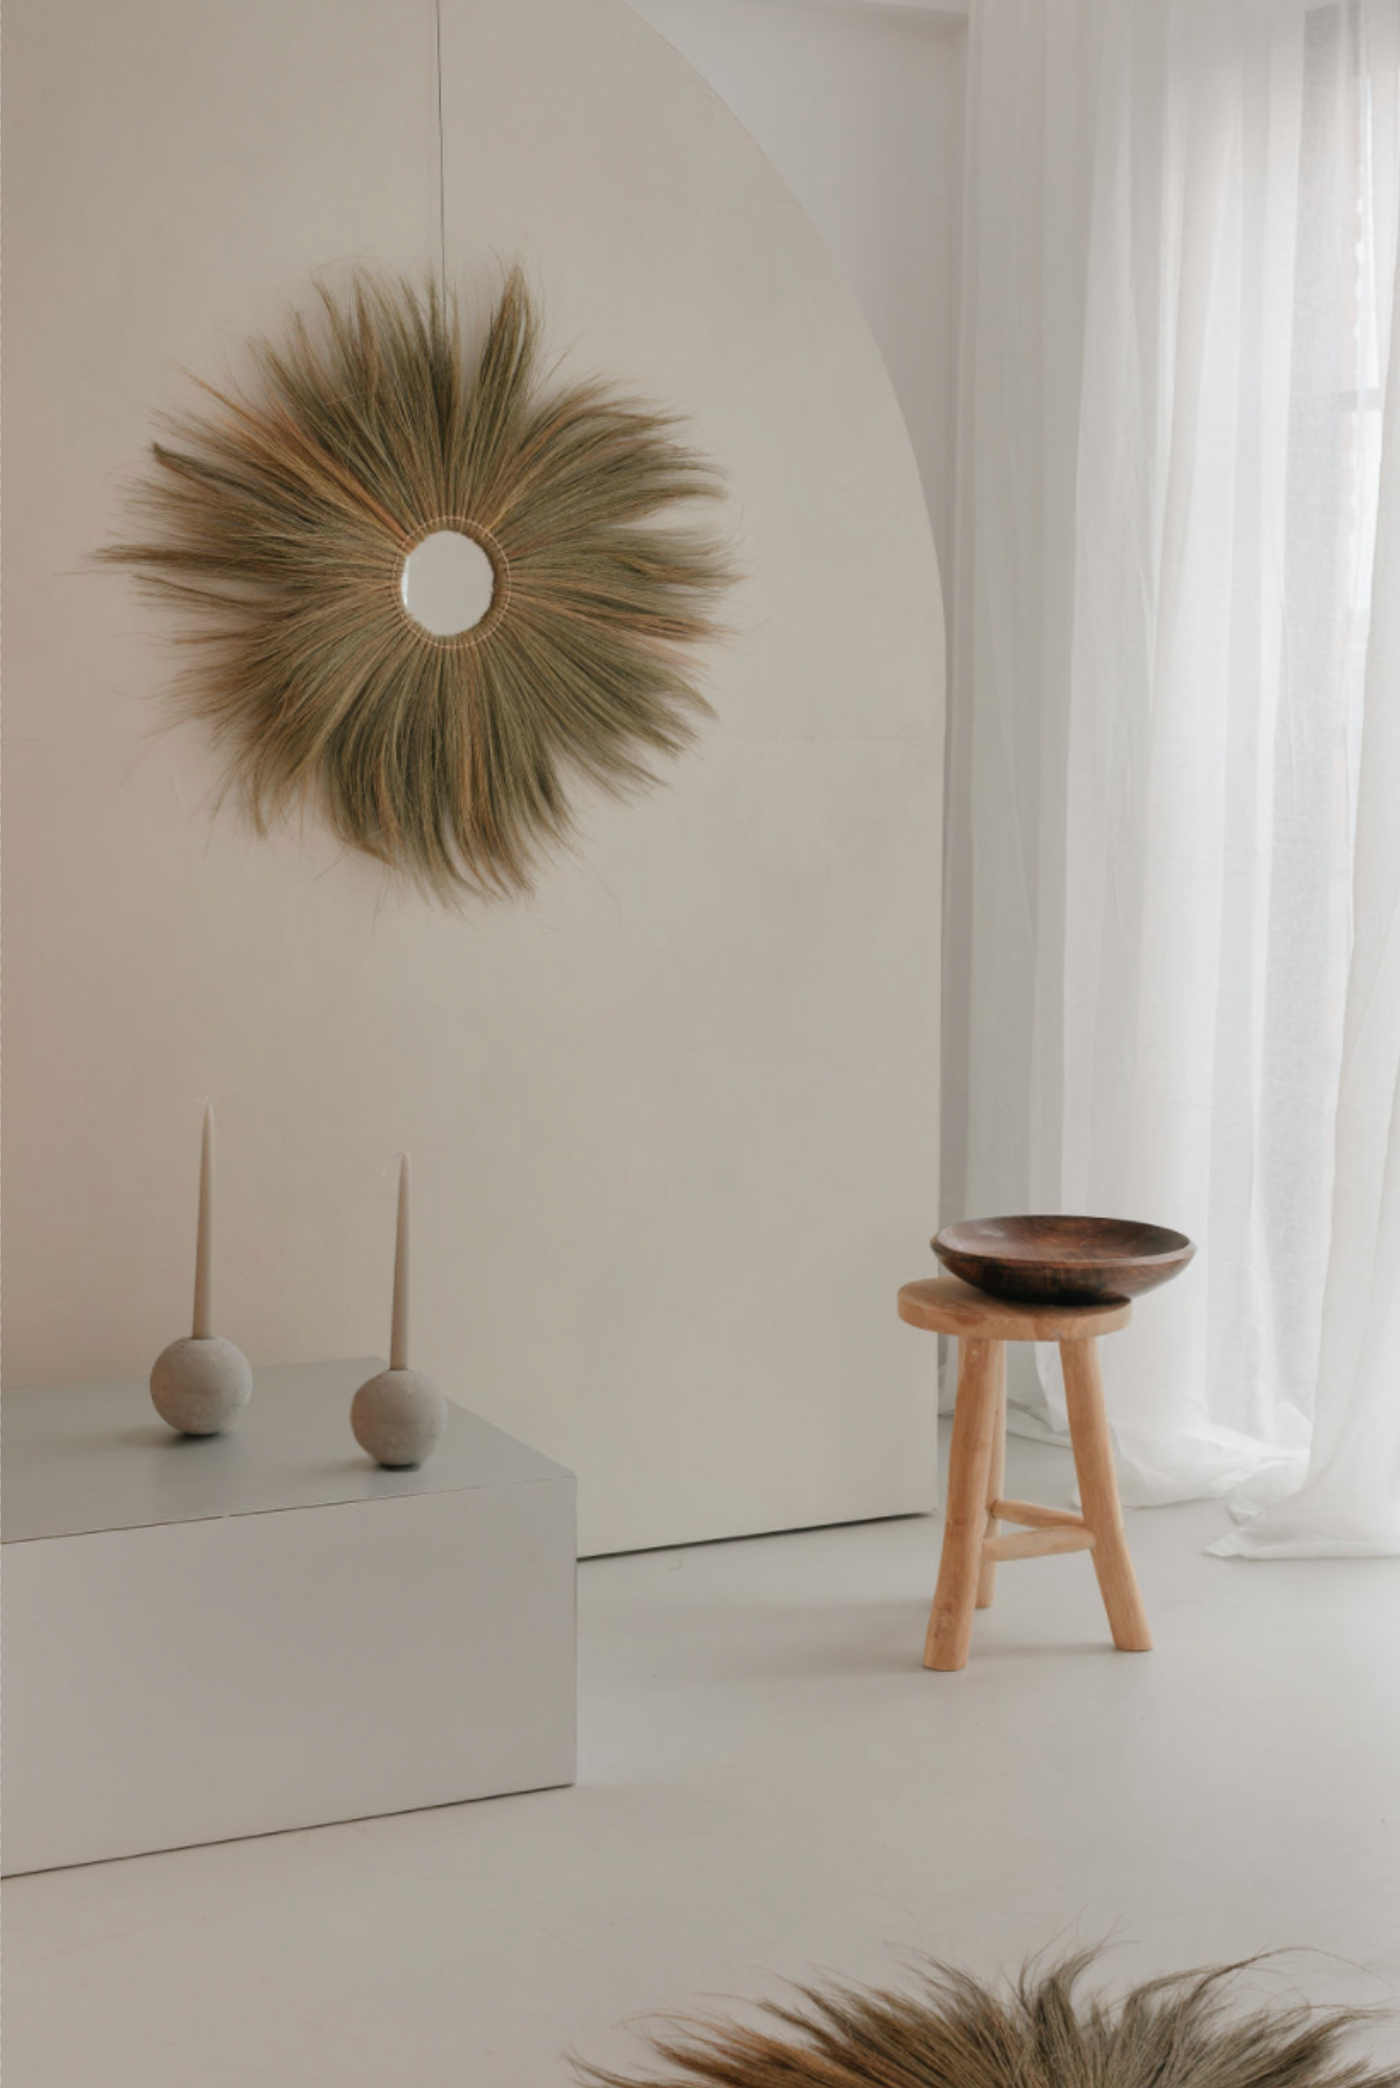 Hand-made Concrete Candle Globes with Grass Straw Mirror and bowl